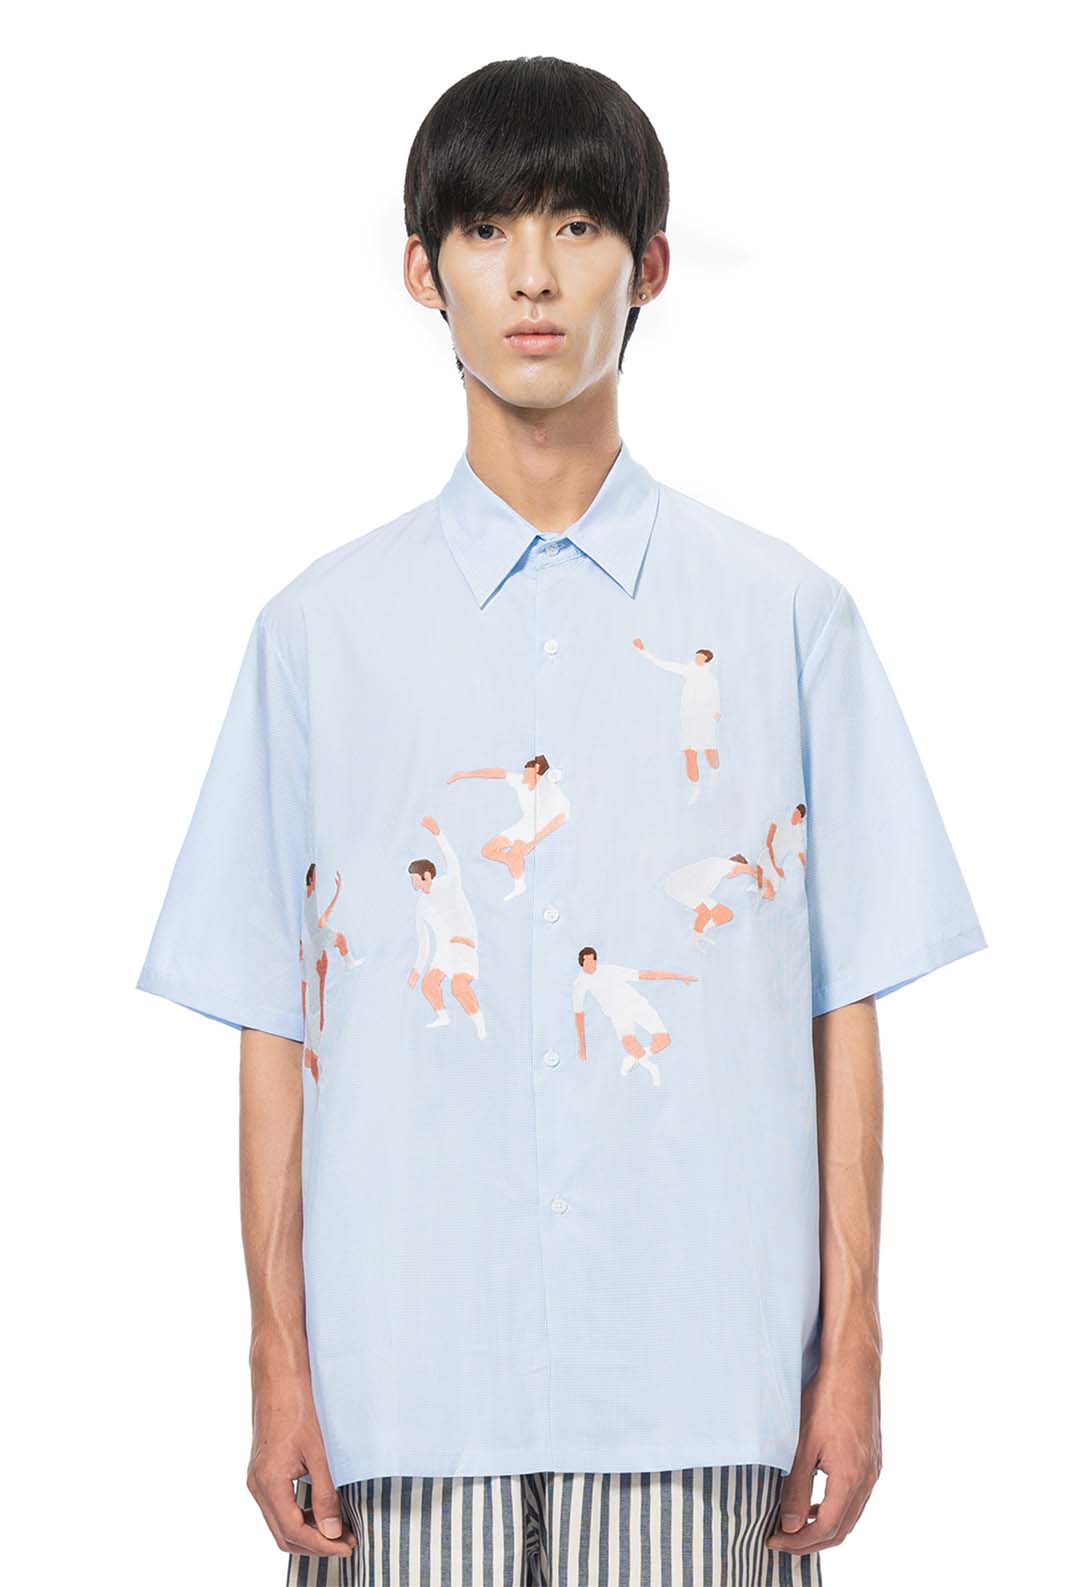 Short-sleeved shirt with hand-painted embroidery